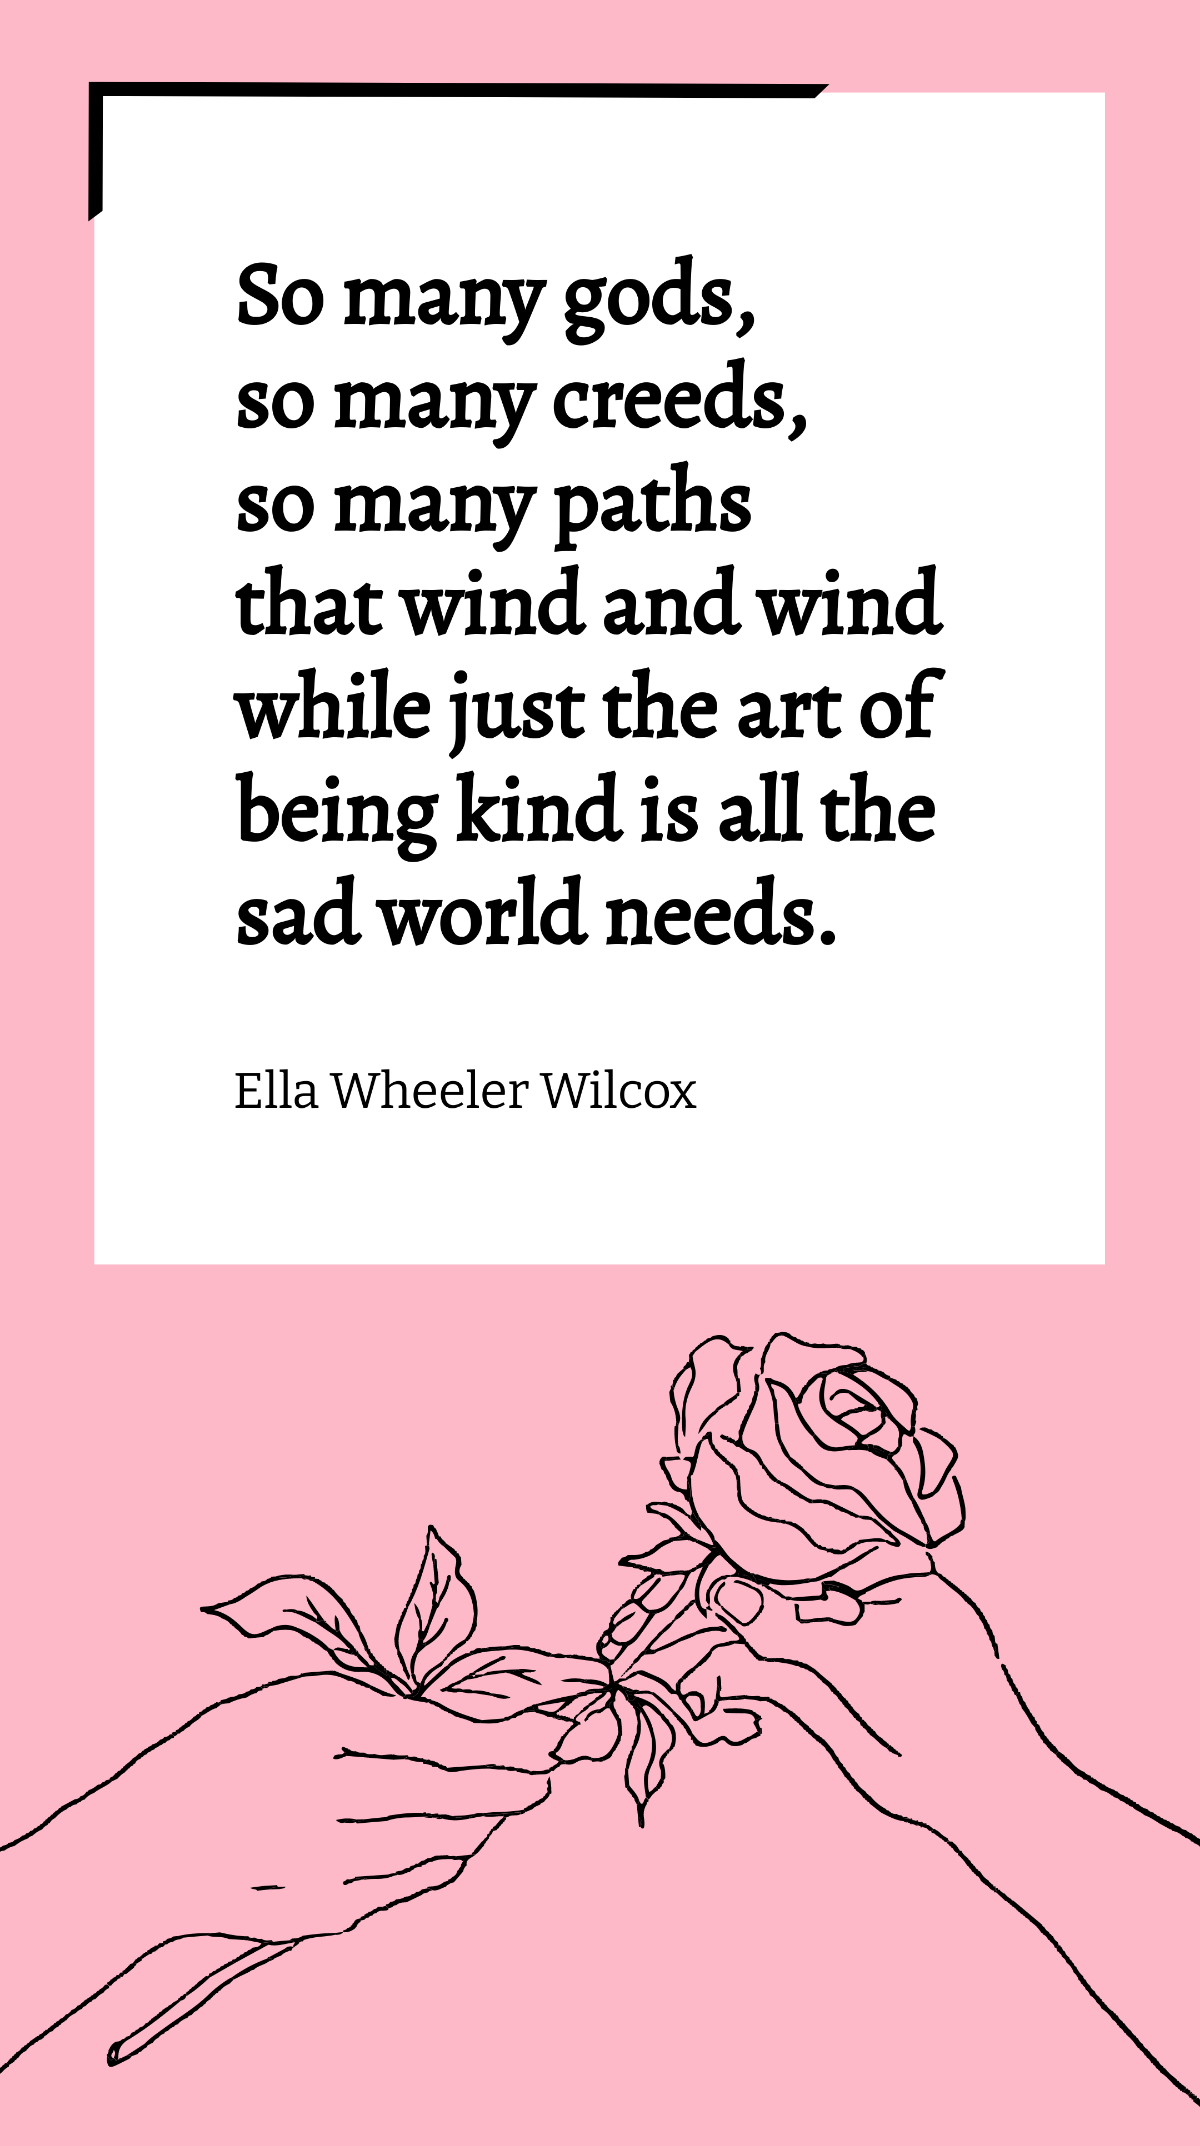 Ella Wheeler Wilcox - So many gods, so many creeds, so many paths that wind and wind while just the art of being kind is all the sad world needs. Template